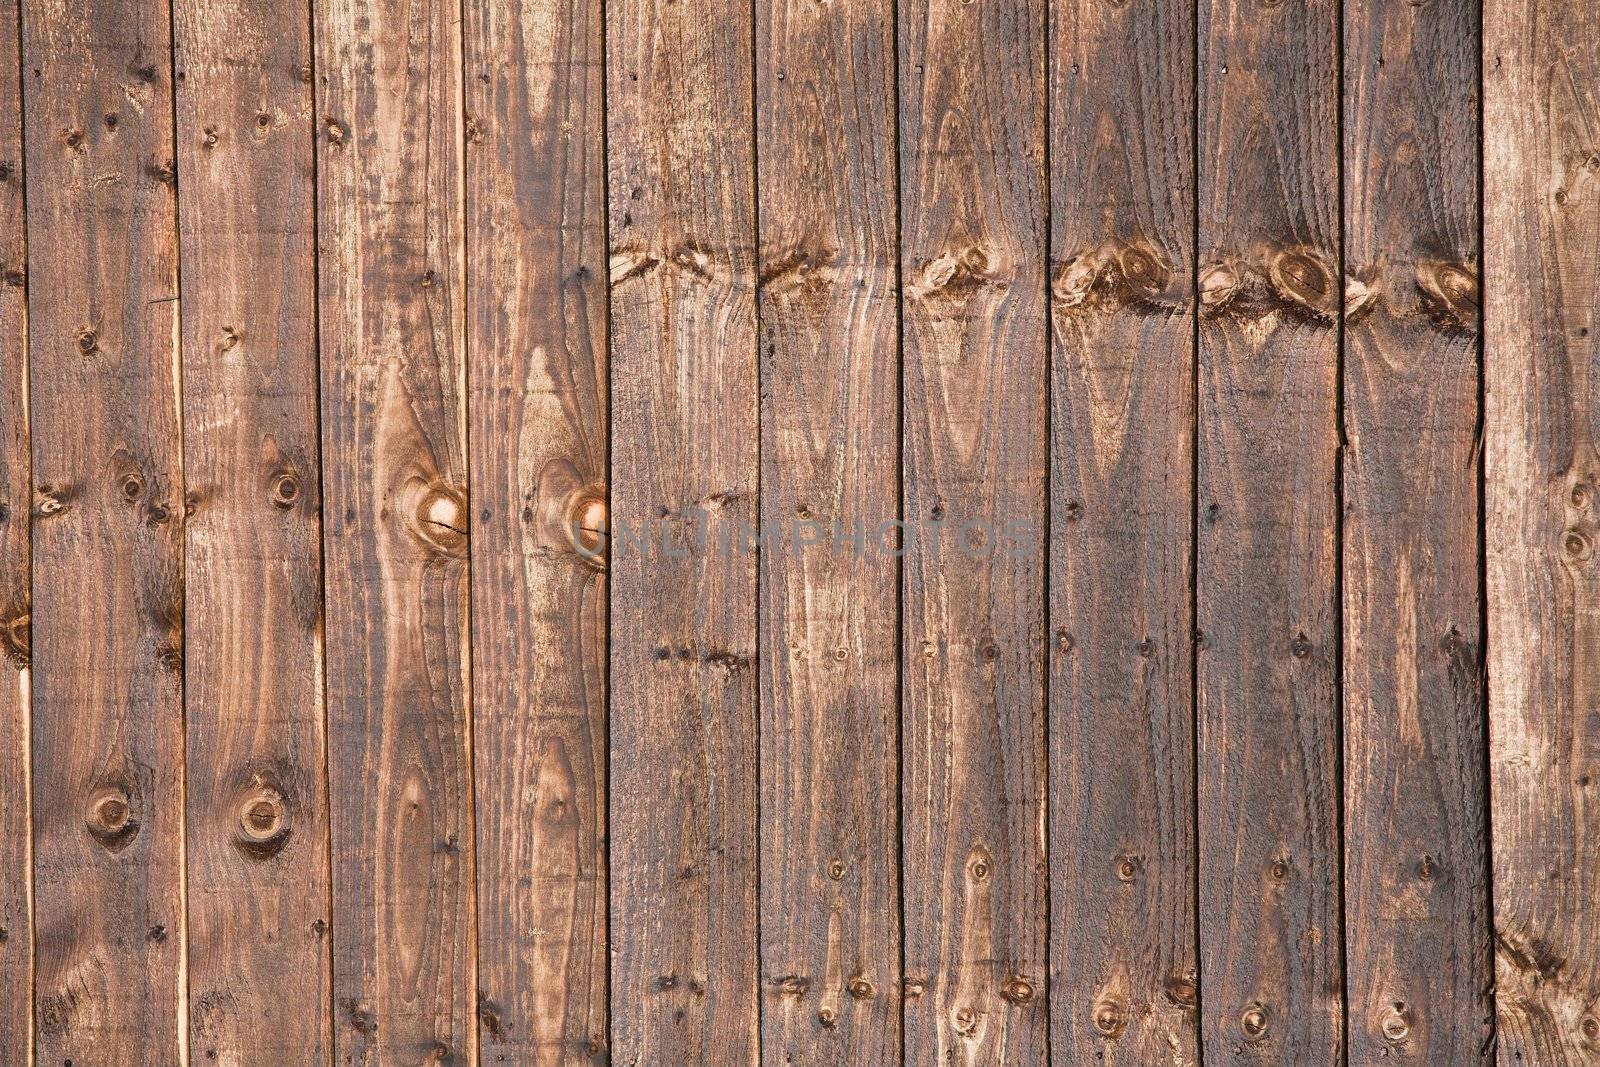 Section of a wooden garden fence treated with creosote preservative